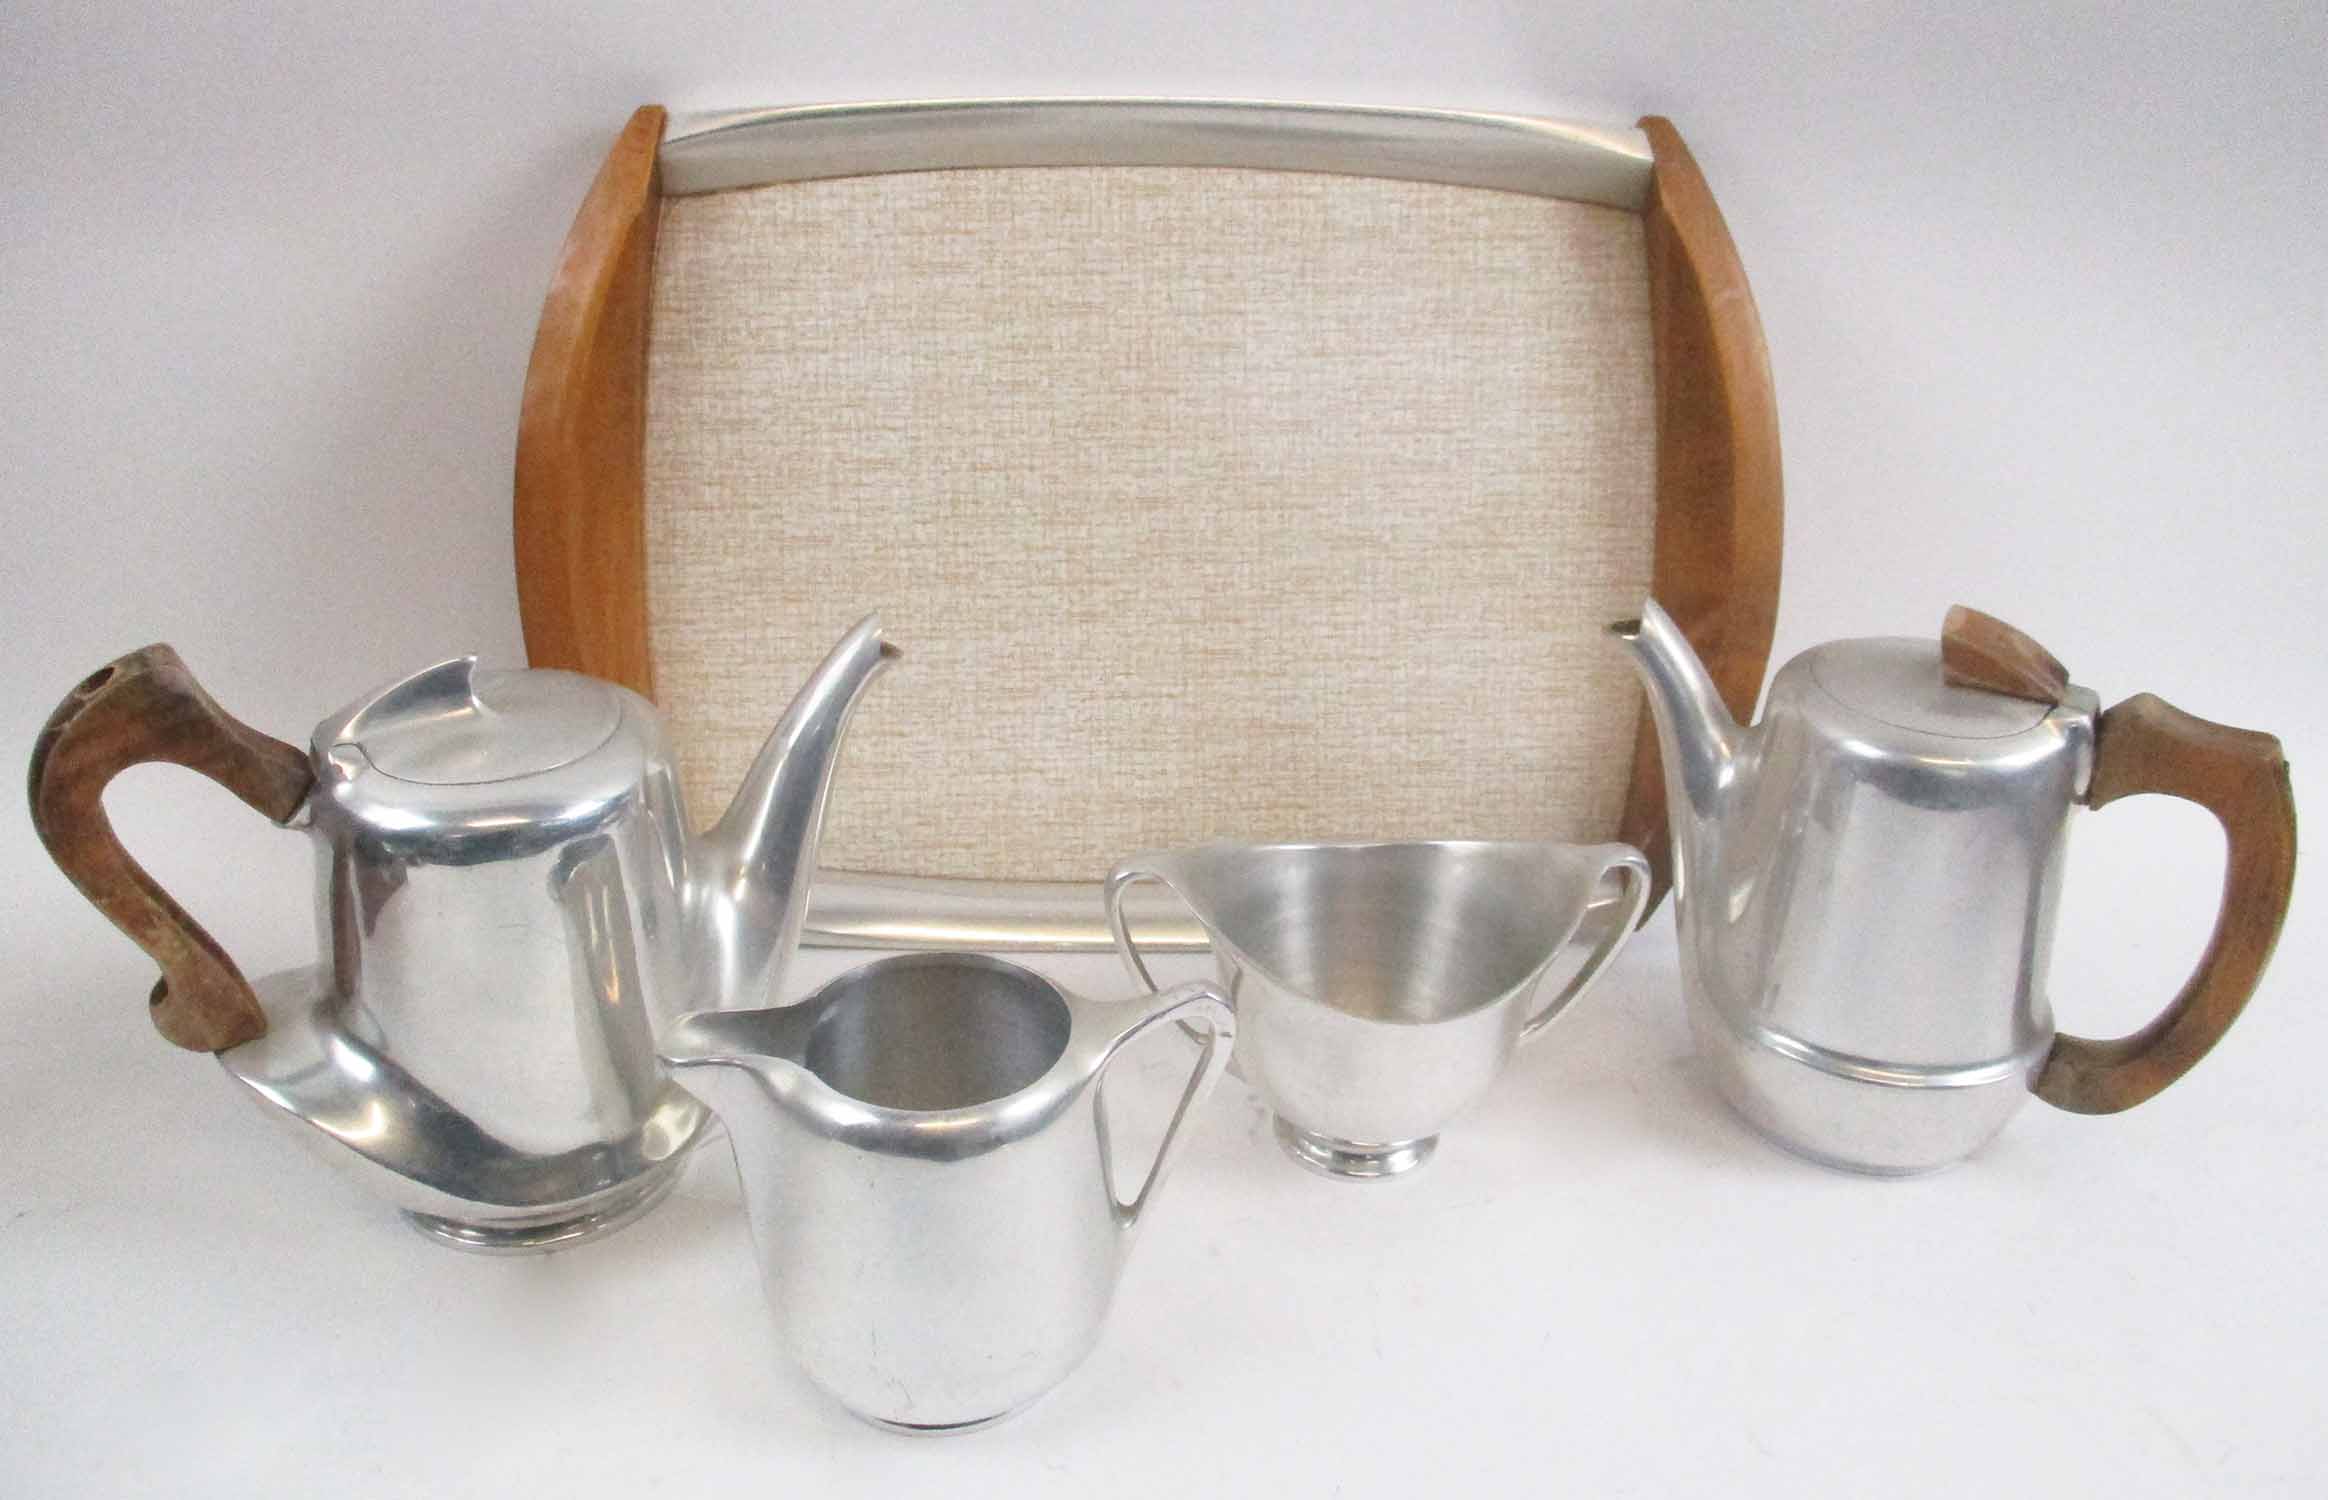 FOUR PIECE PICQUOT WARE TEA SERVICE, circa 1950's, plus matching tray. - Image 2 of 3